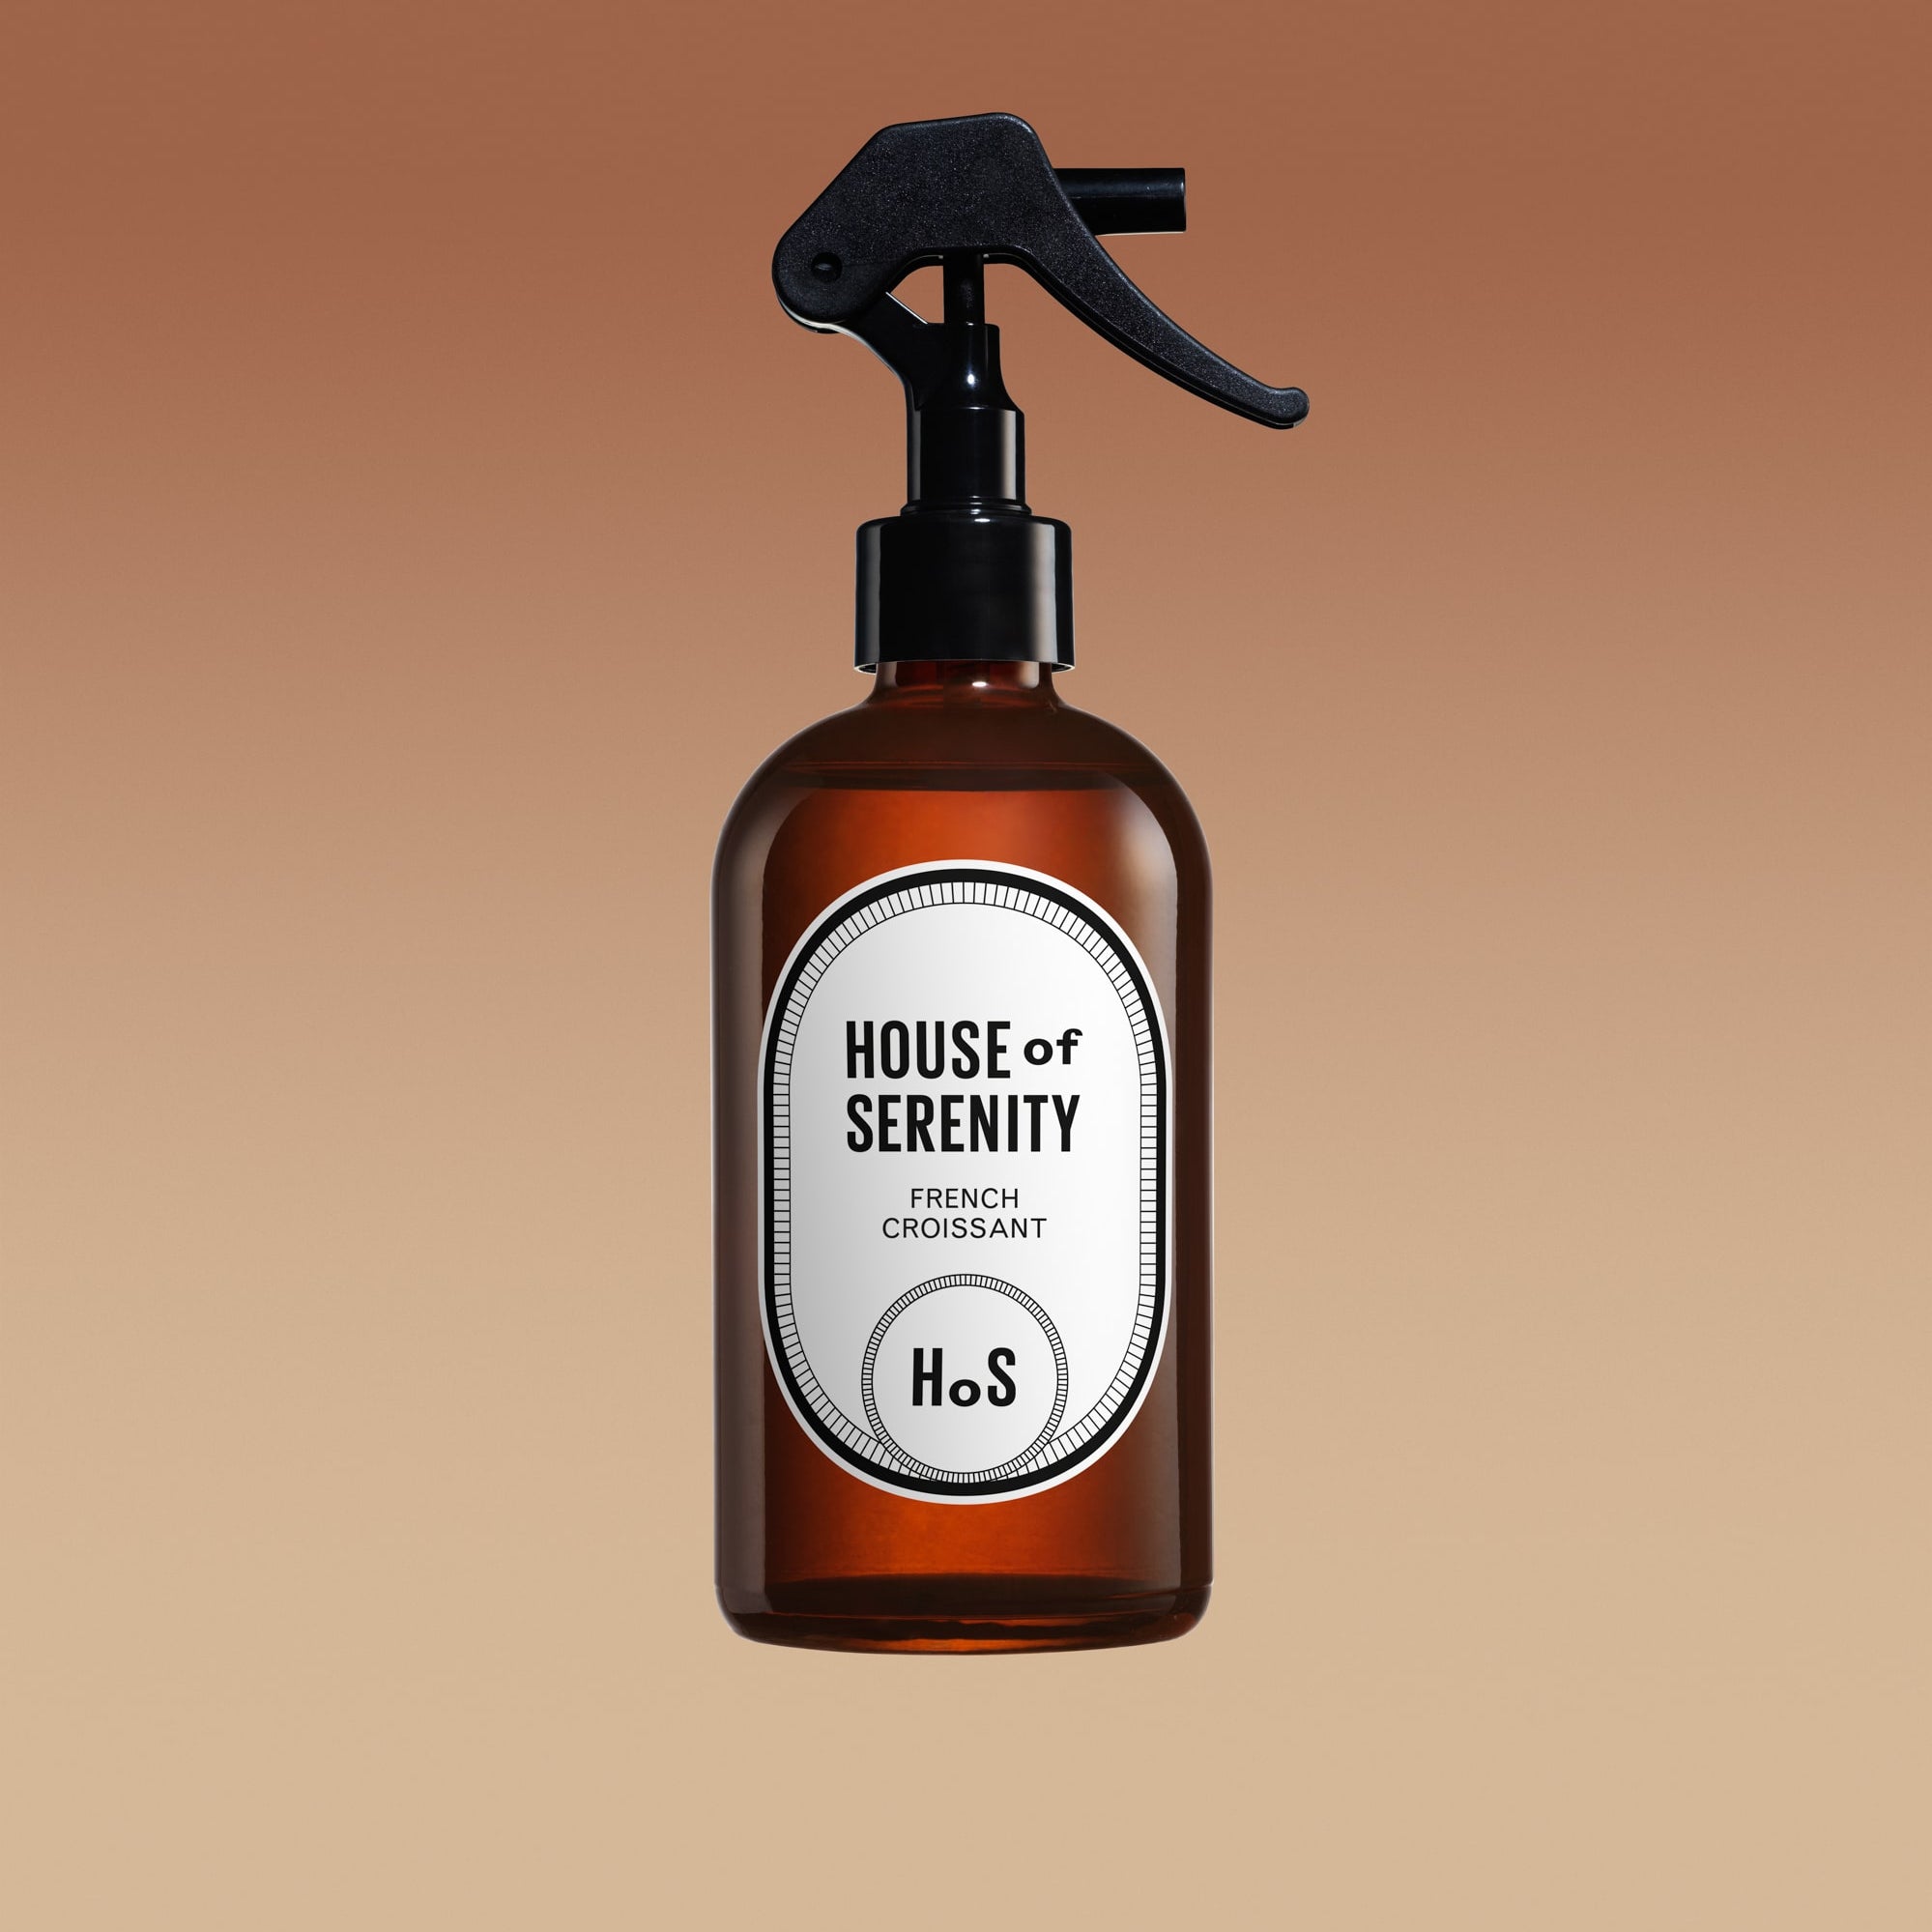 Parfum d'intérieur Room Spray The house of serenity French Croissant Sweet Collection 